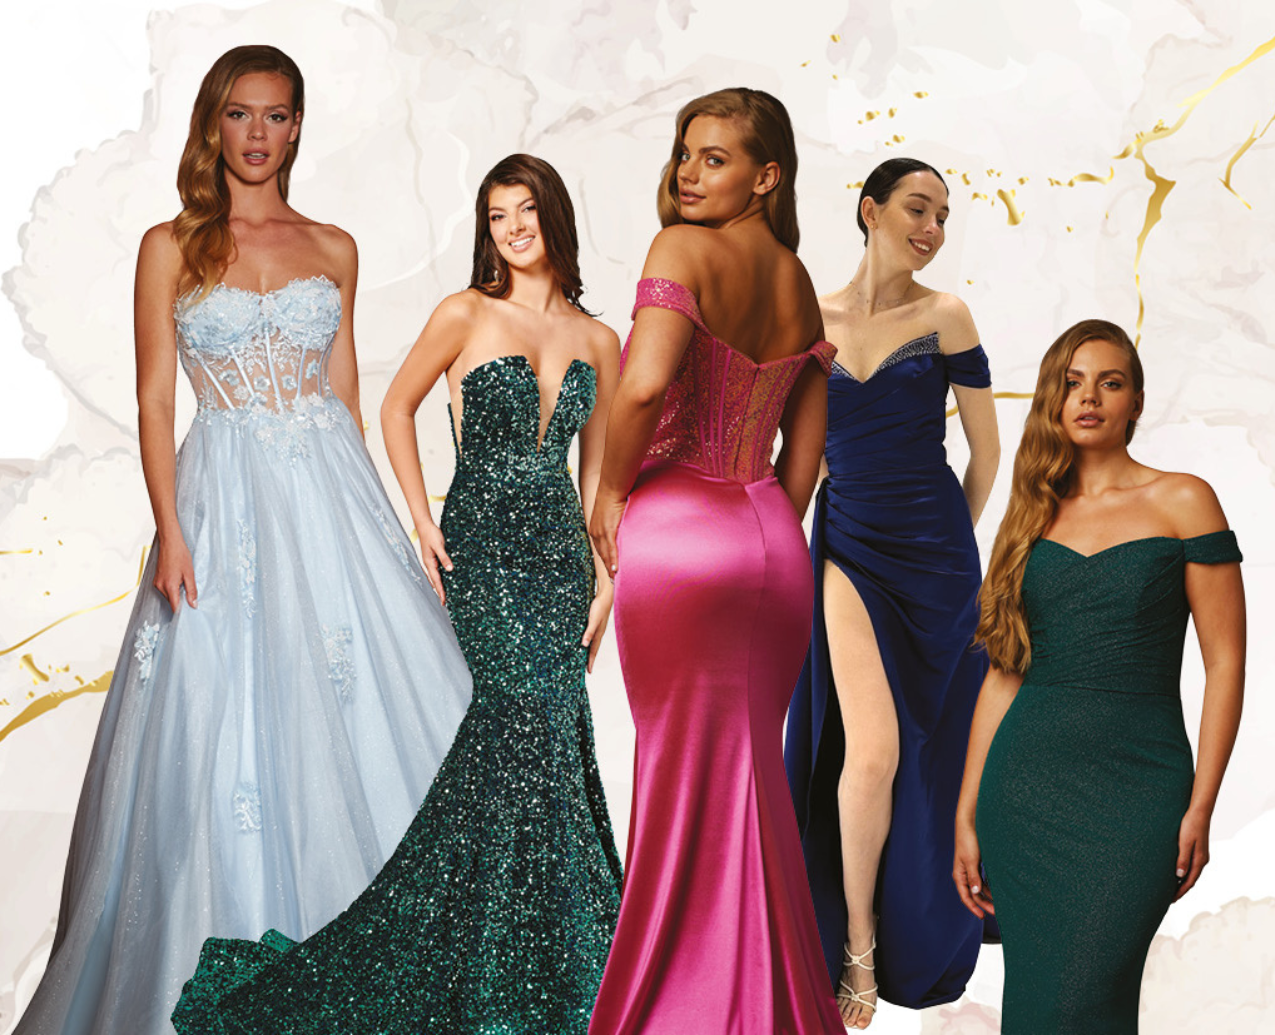 Prom season: Five top prom dresses from some of the top UK prom brands